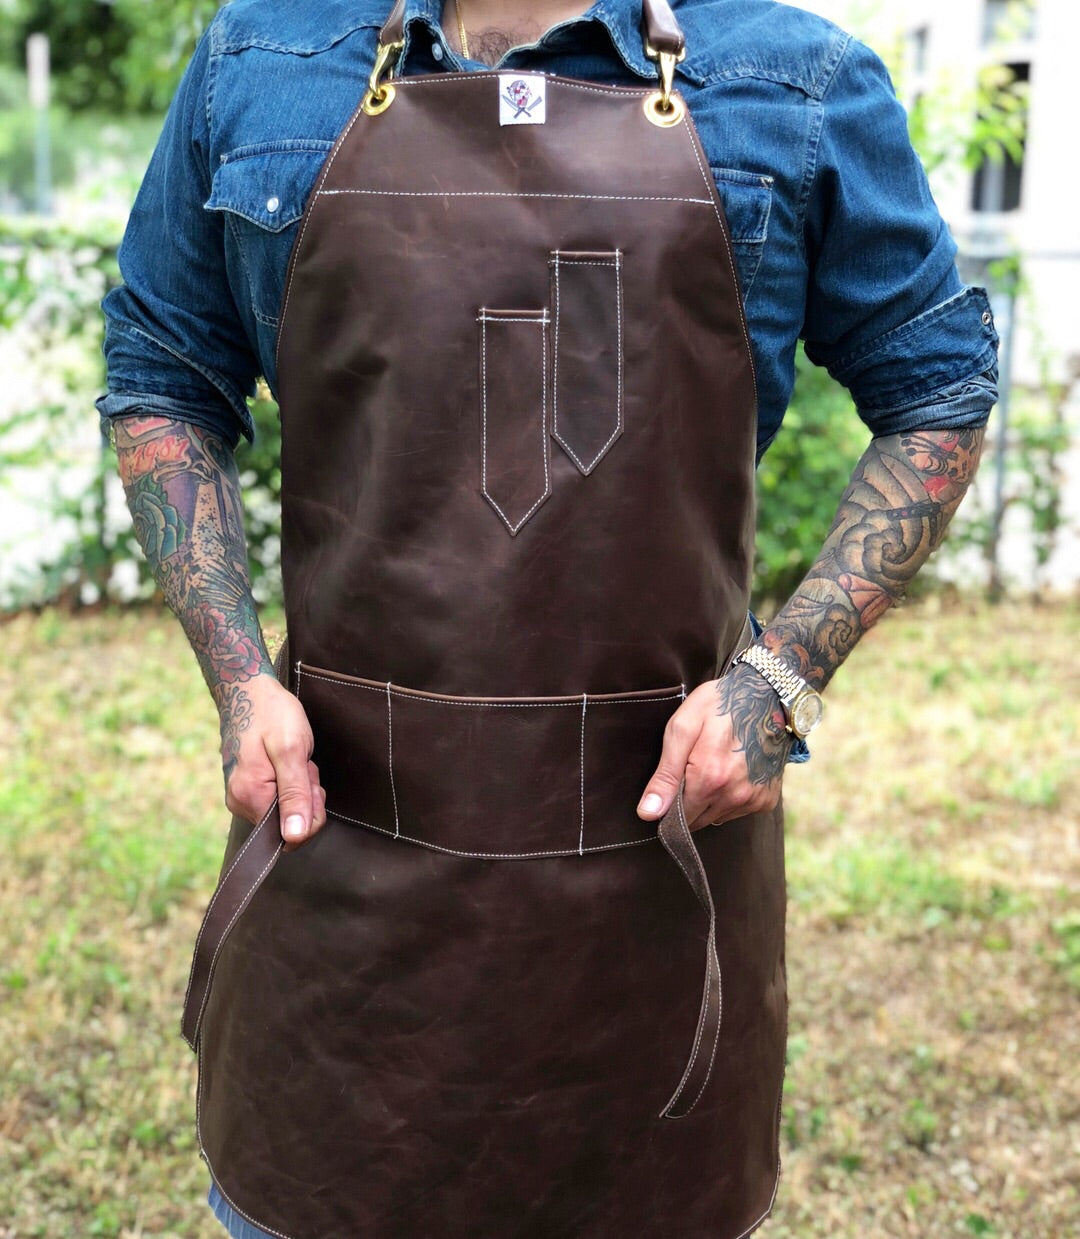 Texas A&M full cognac or brown leather reversible apron